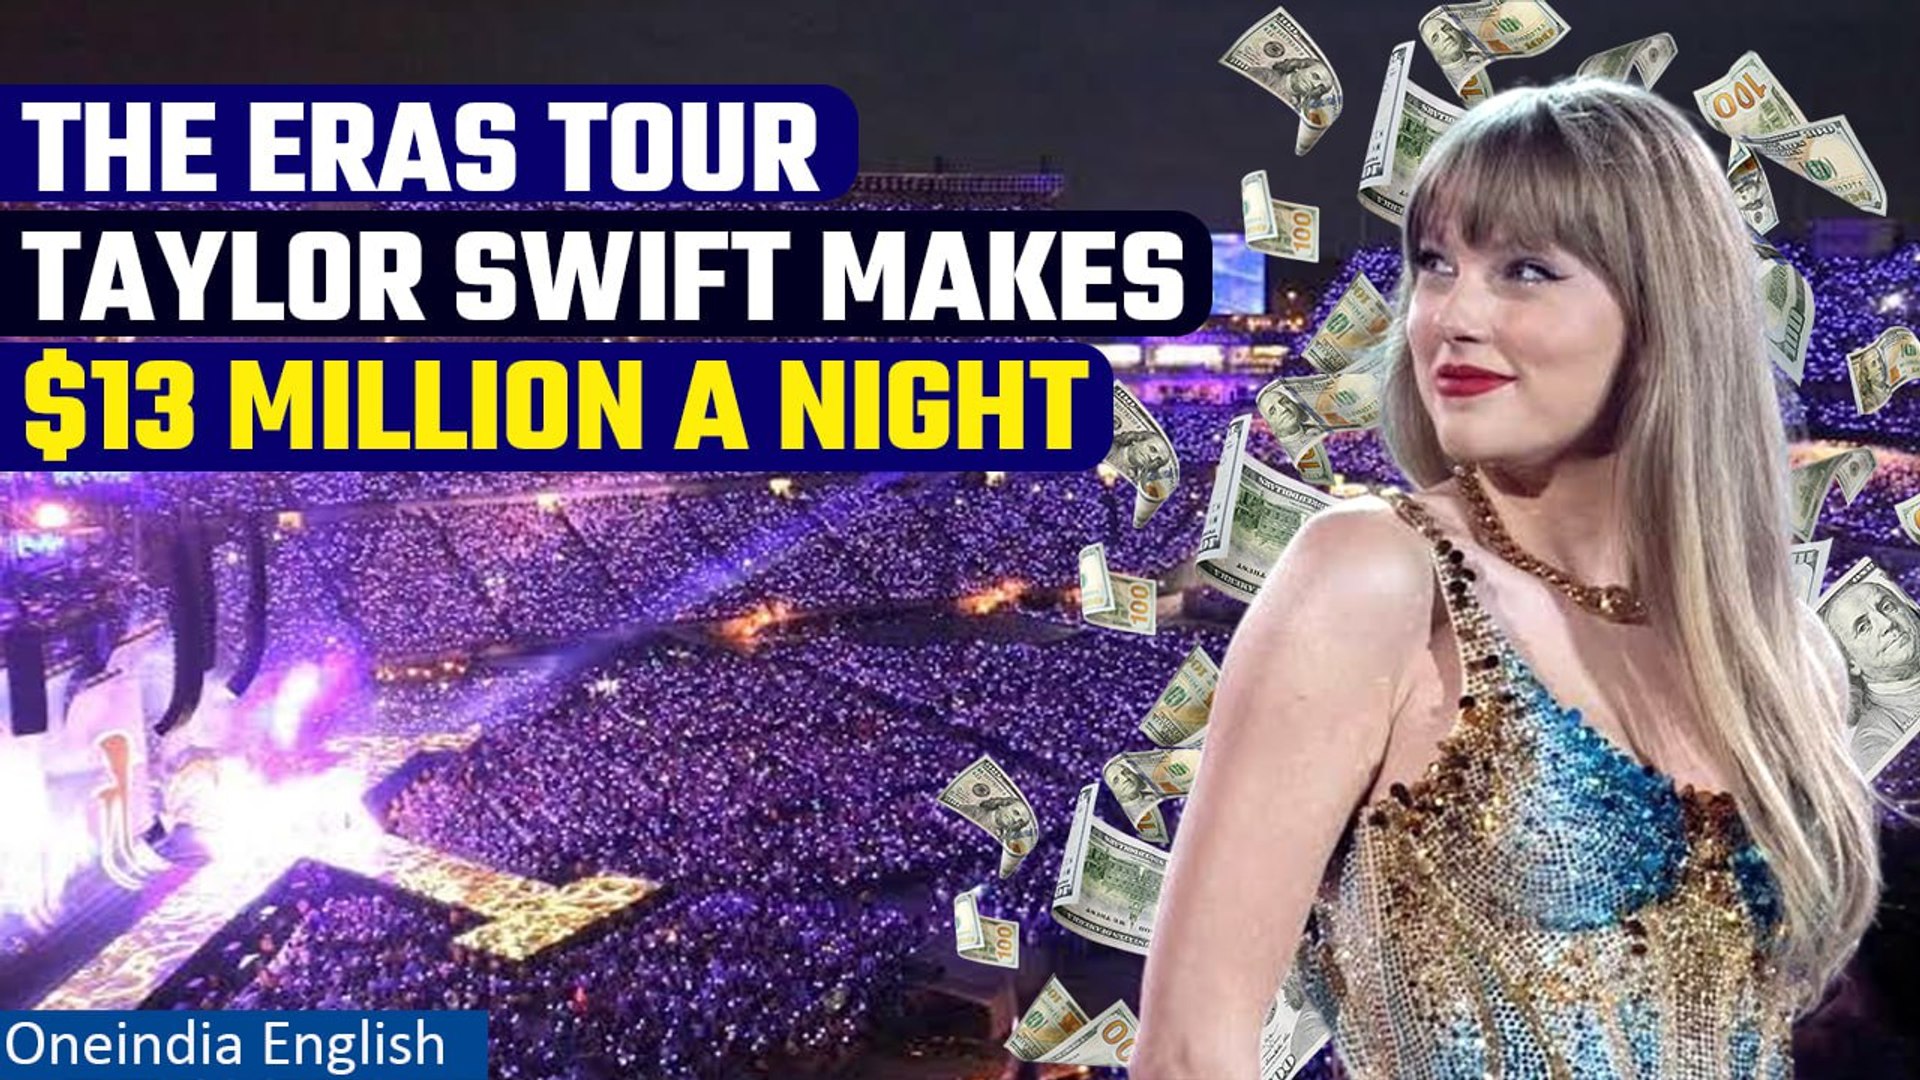 Taylor Swift makes $13 million per night on her tour, to create